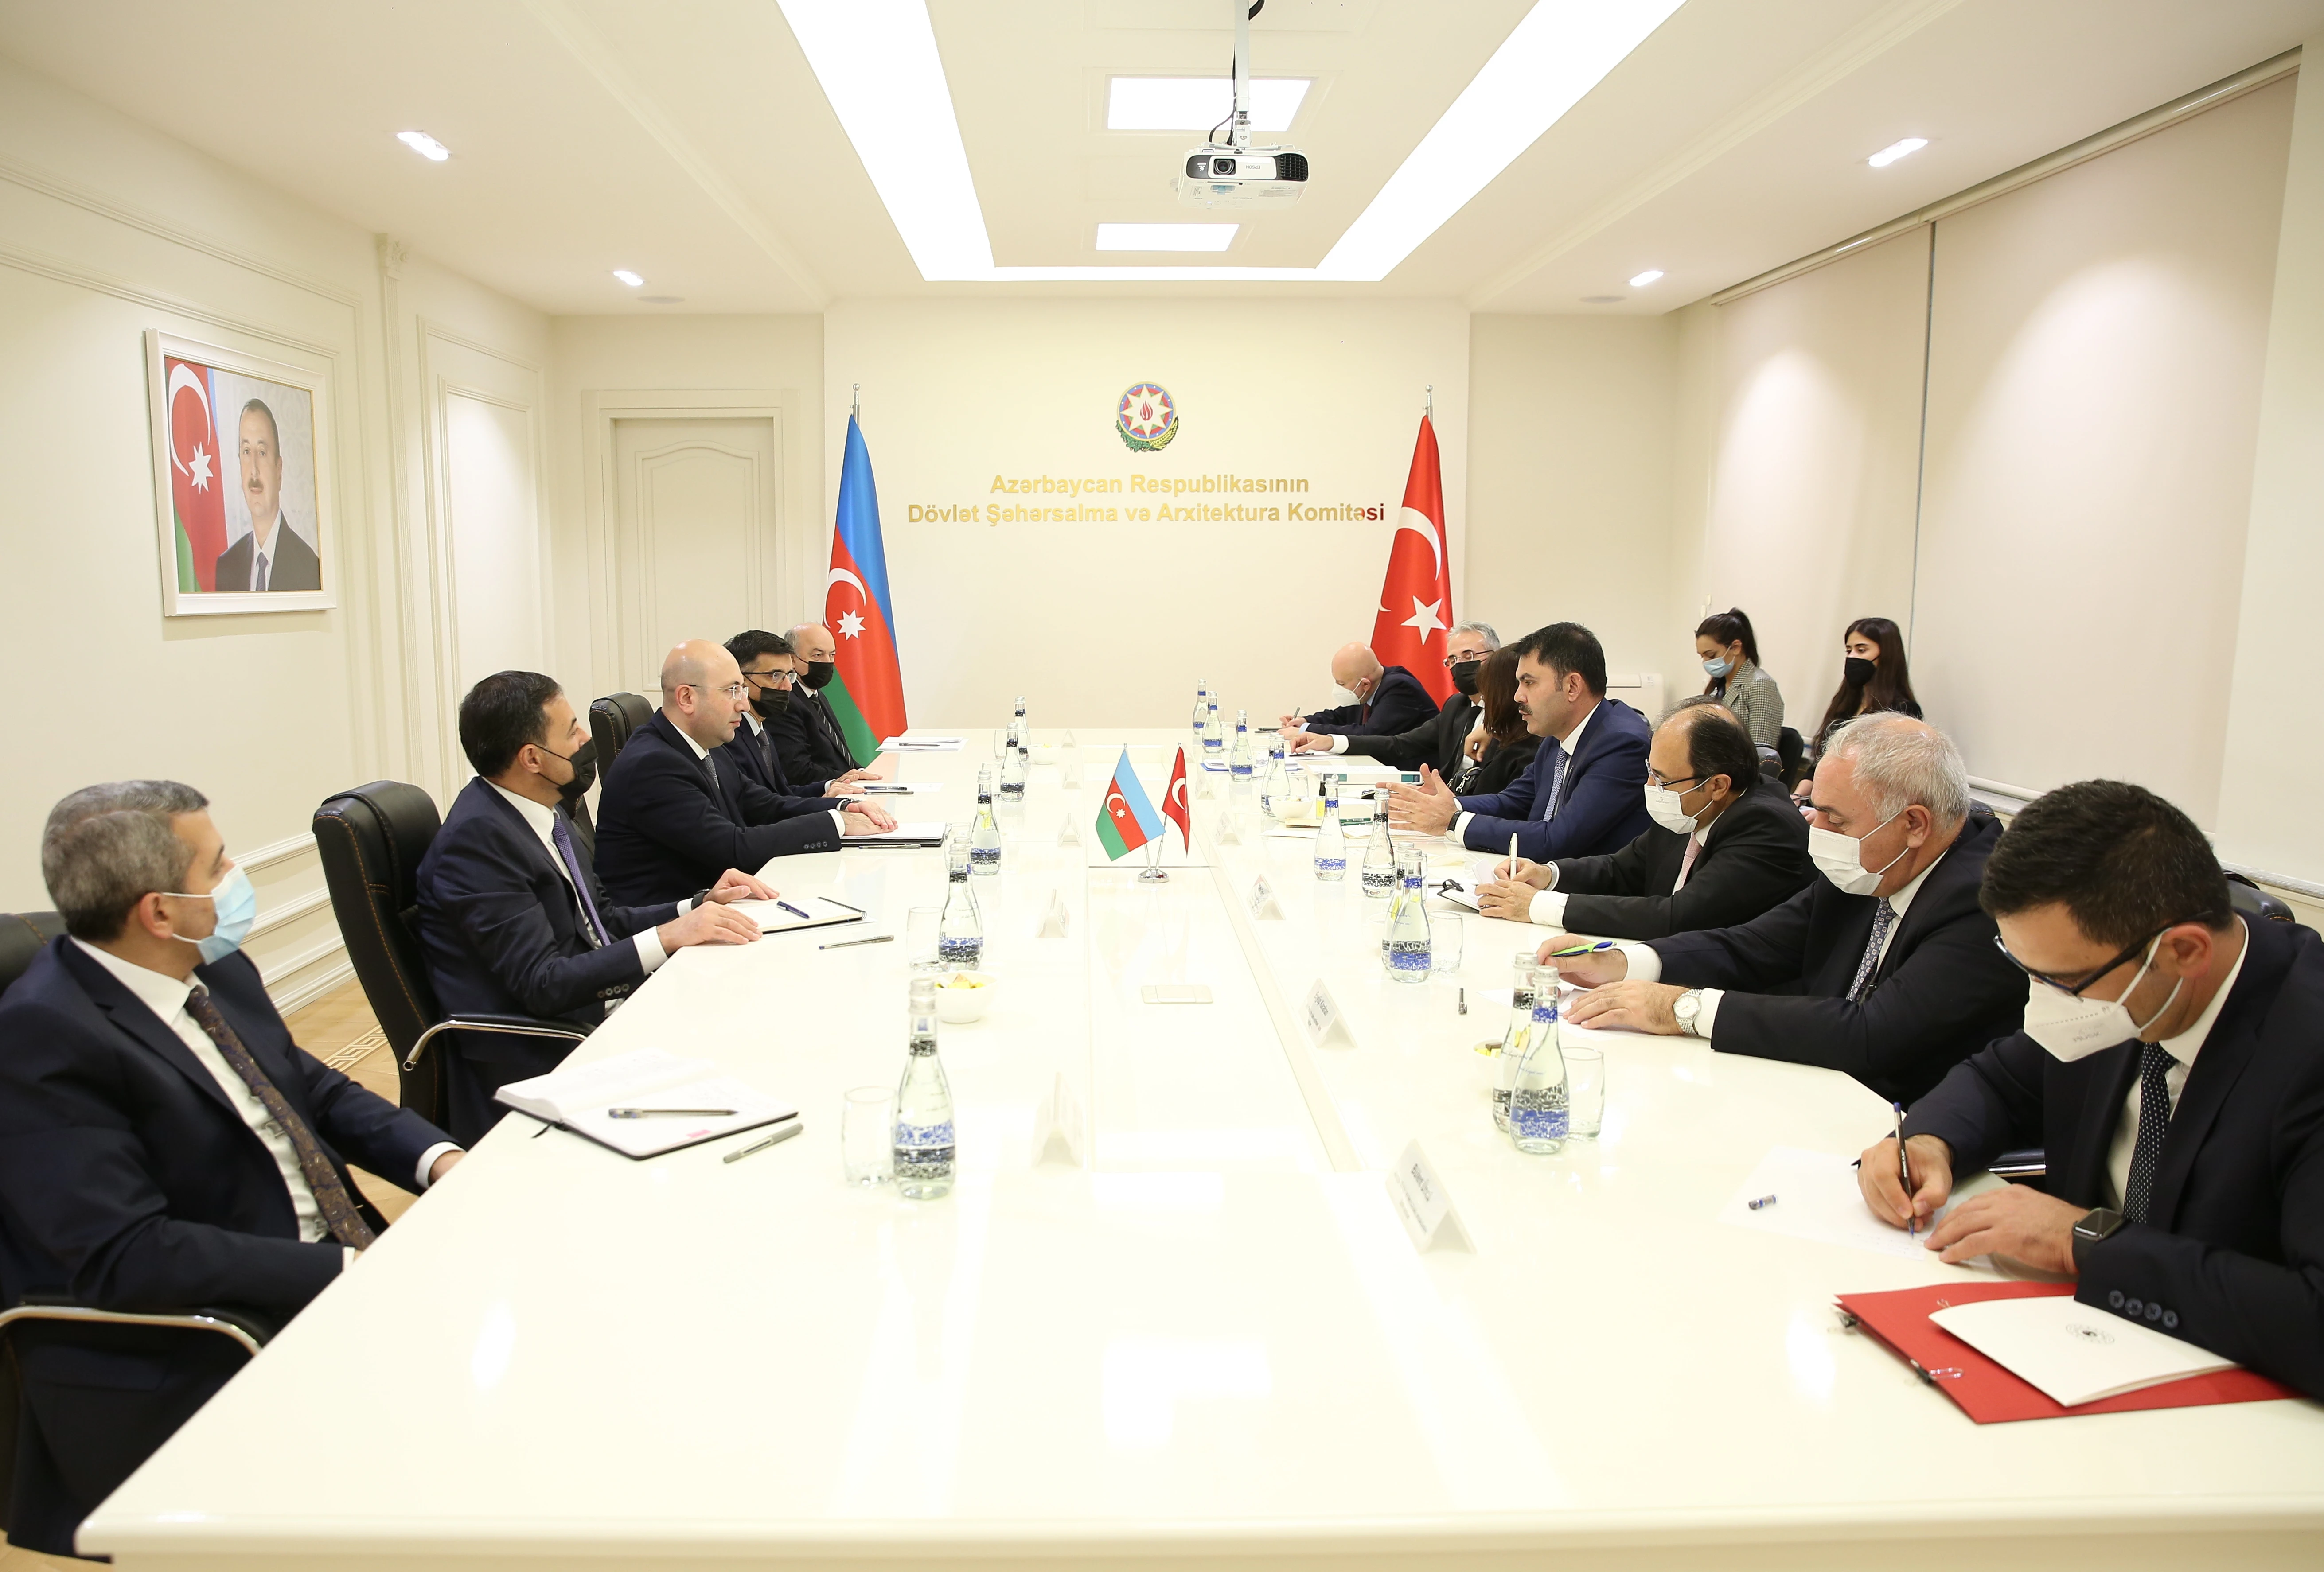 Chairman of the State Committee for Urban Planning and Architecture received the Minister of Environment and Urban Development of the Republic of Turkey